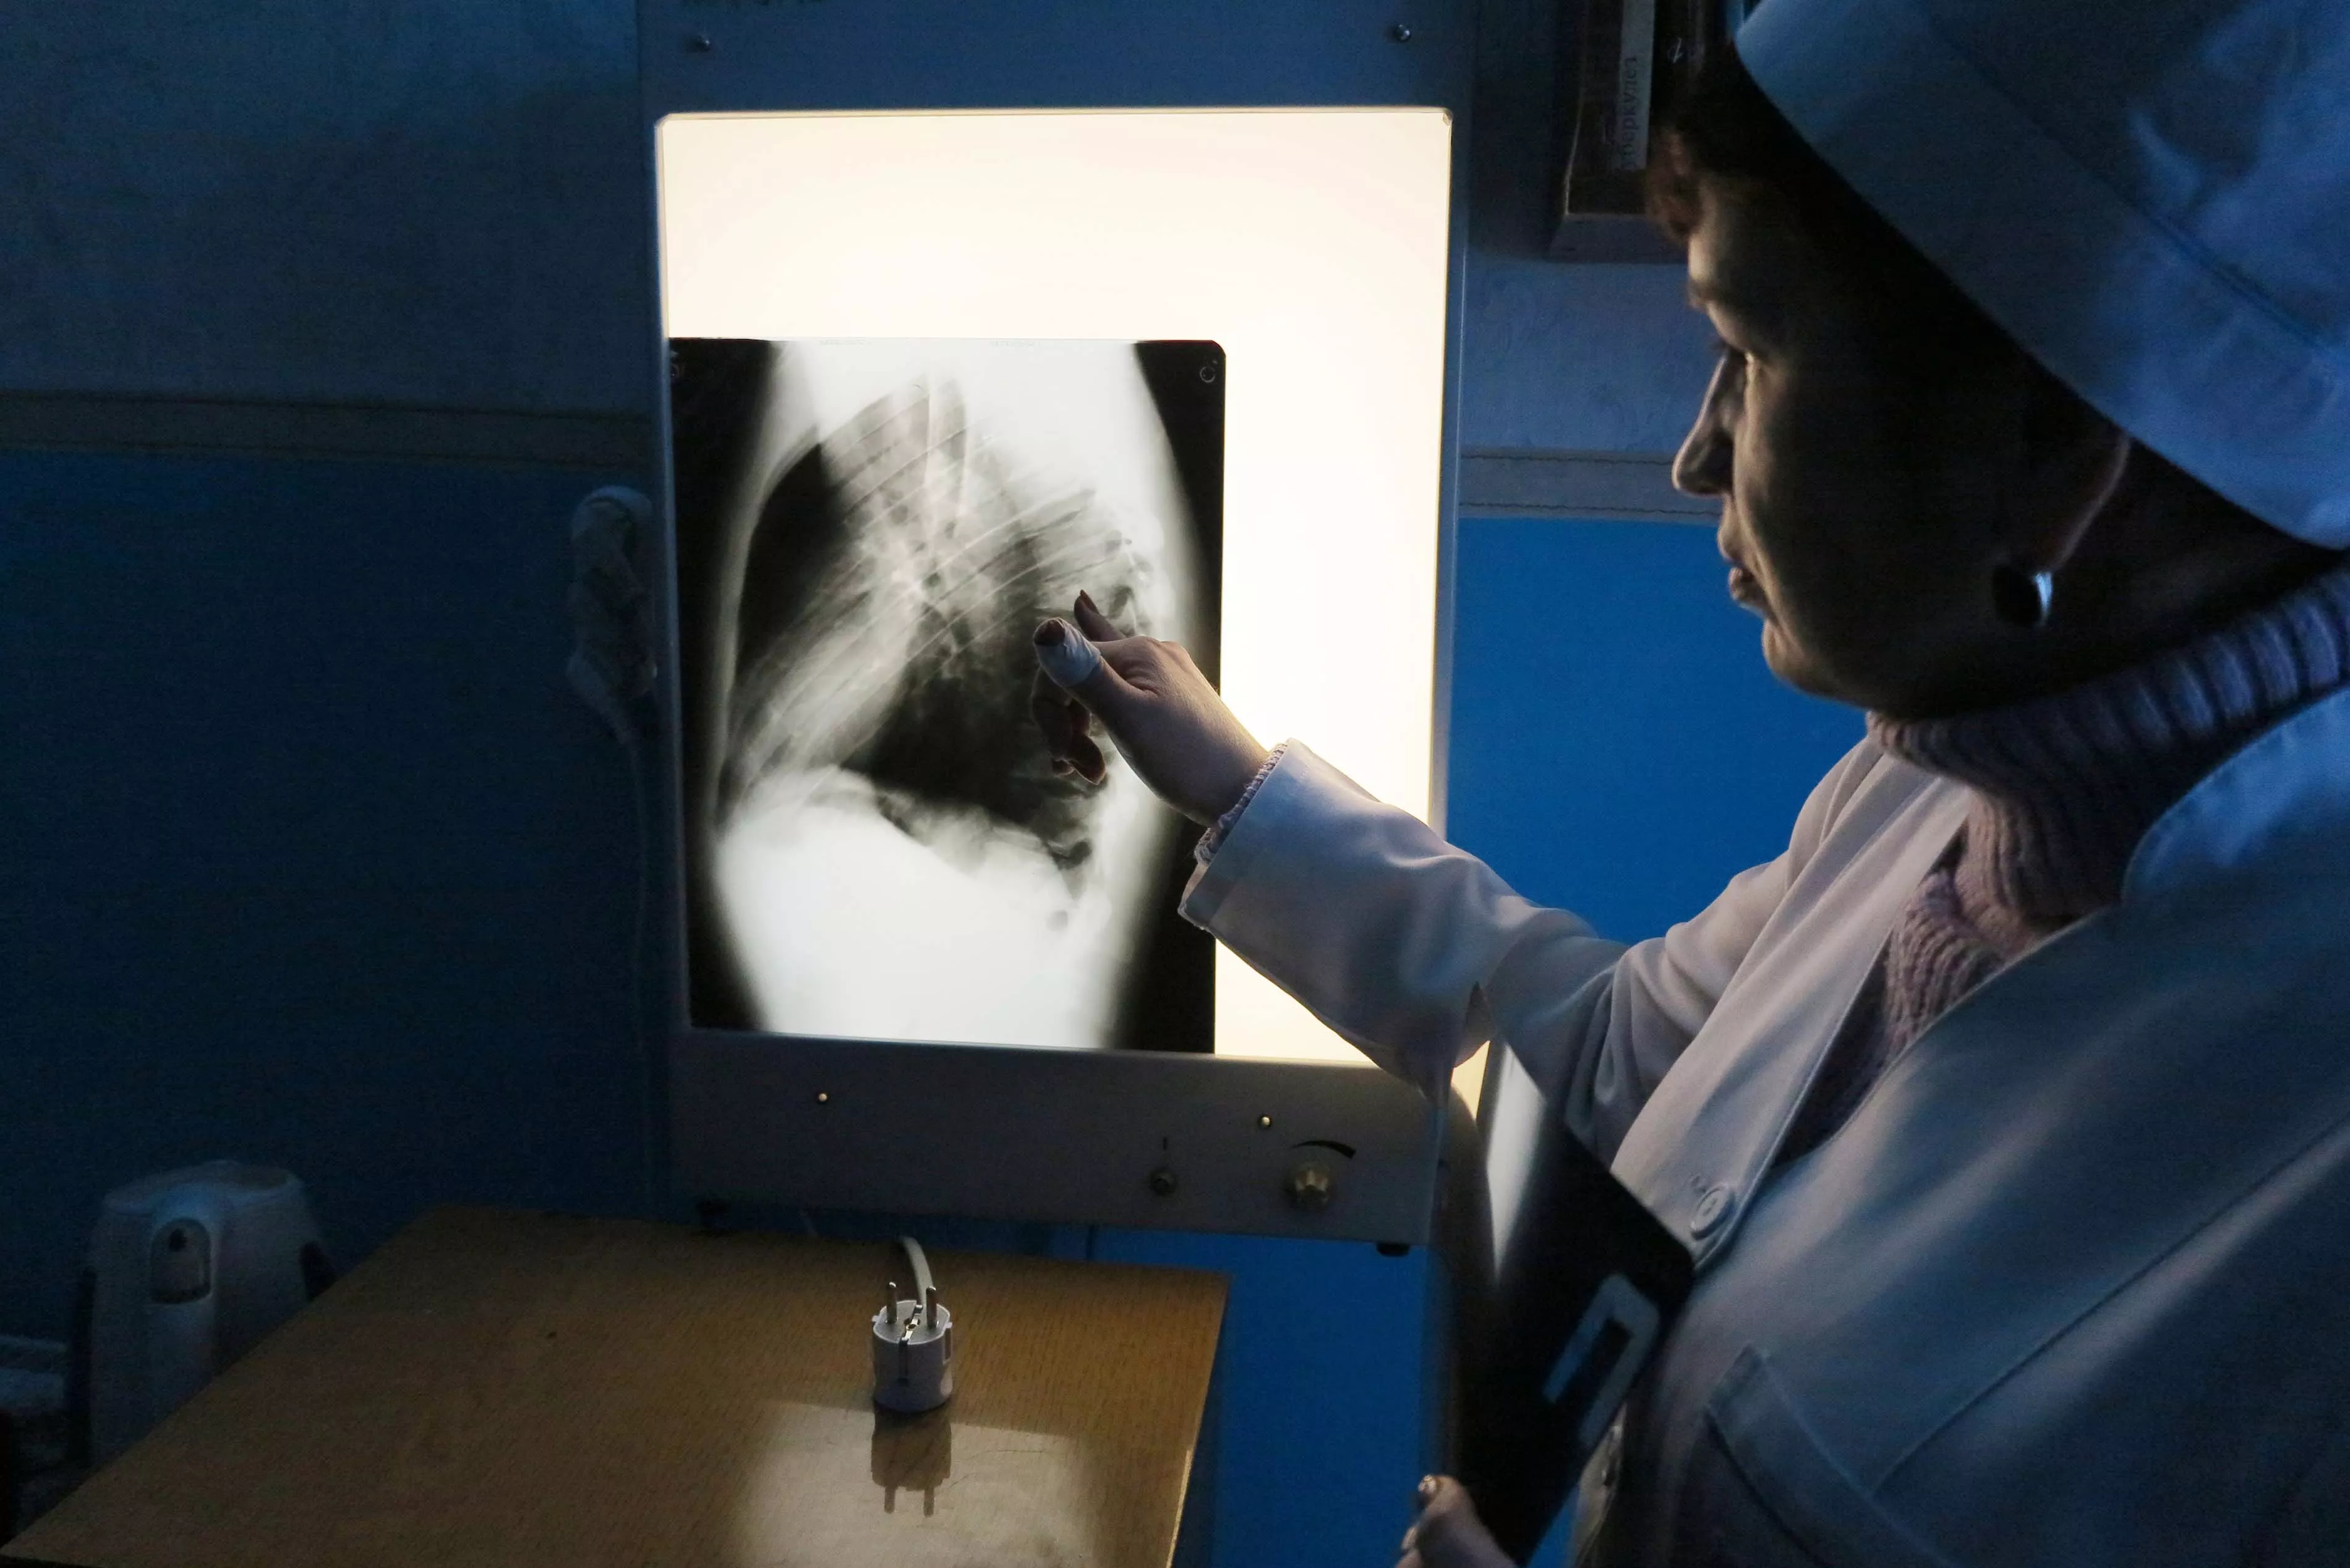 A Ministry of Health nurse inspects an x-ray scan of the lungs of one patient who is supported by MSF, at the Artyomovsk TB dispensary outside Donetsk.